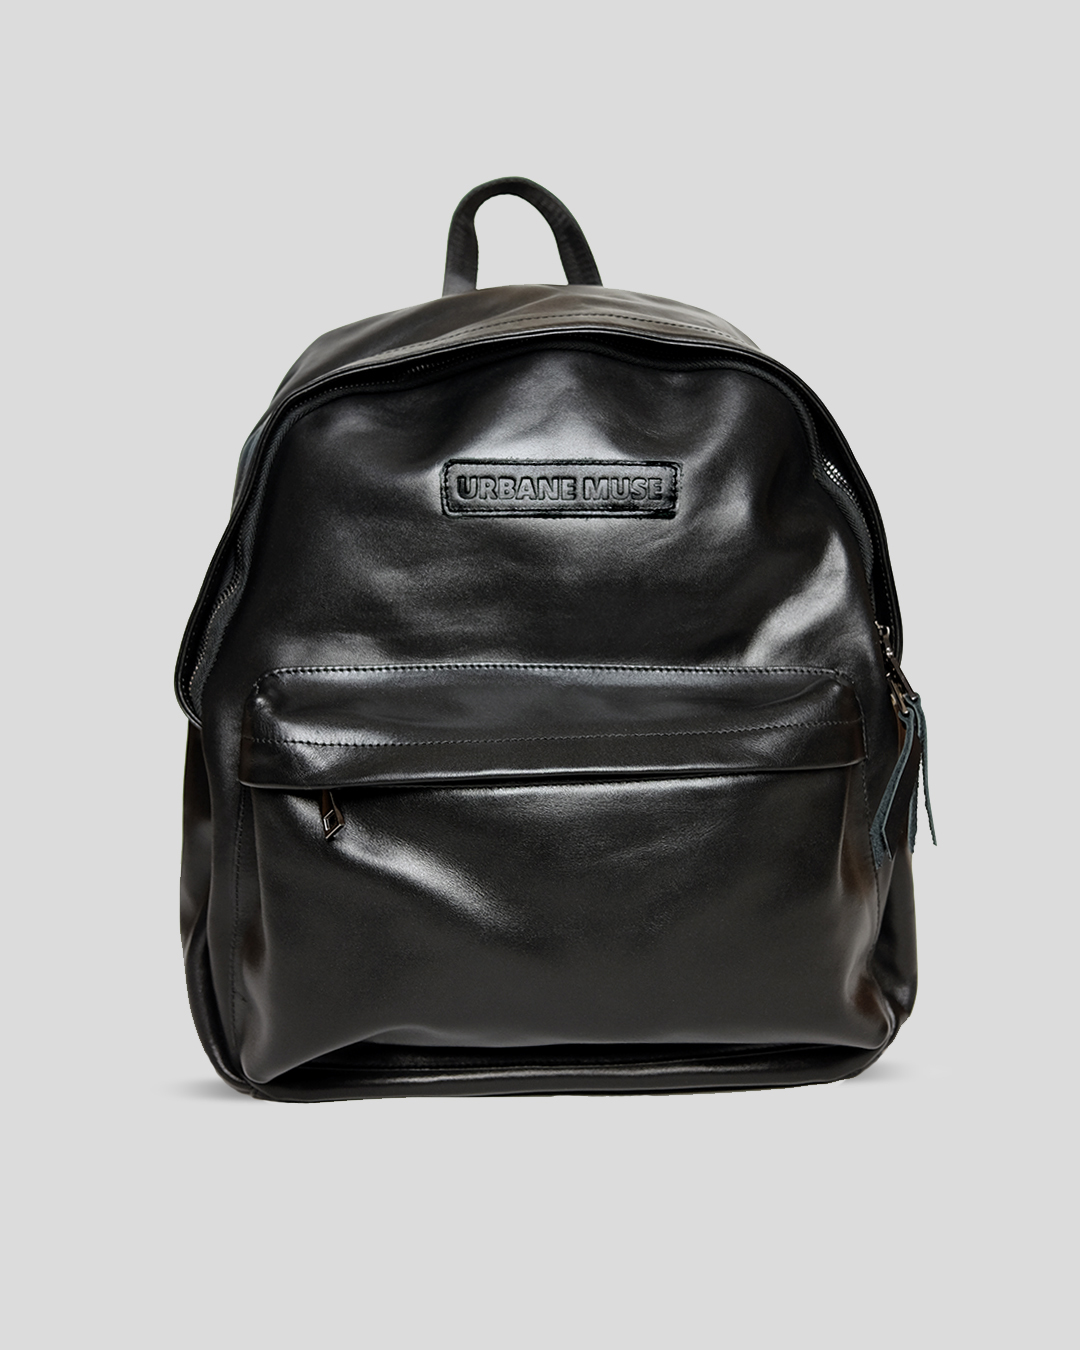 Backpack in Leather - URBANE MUSE CHRIS SMITH®